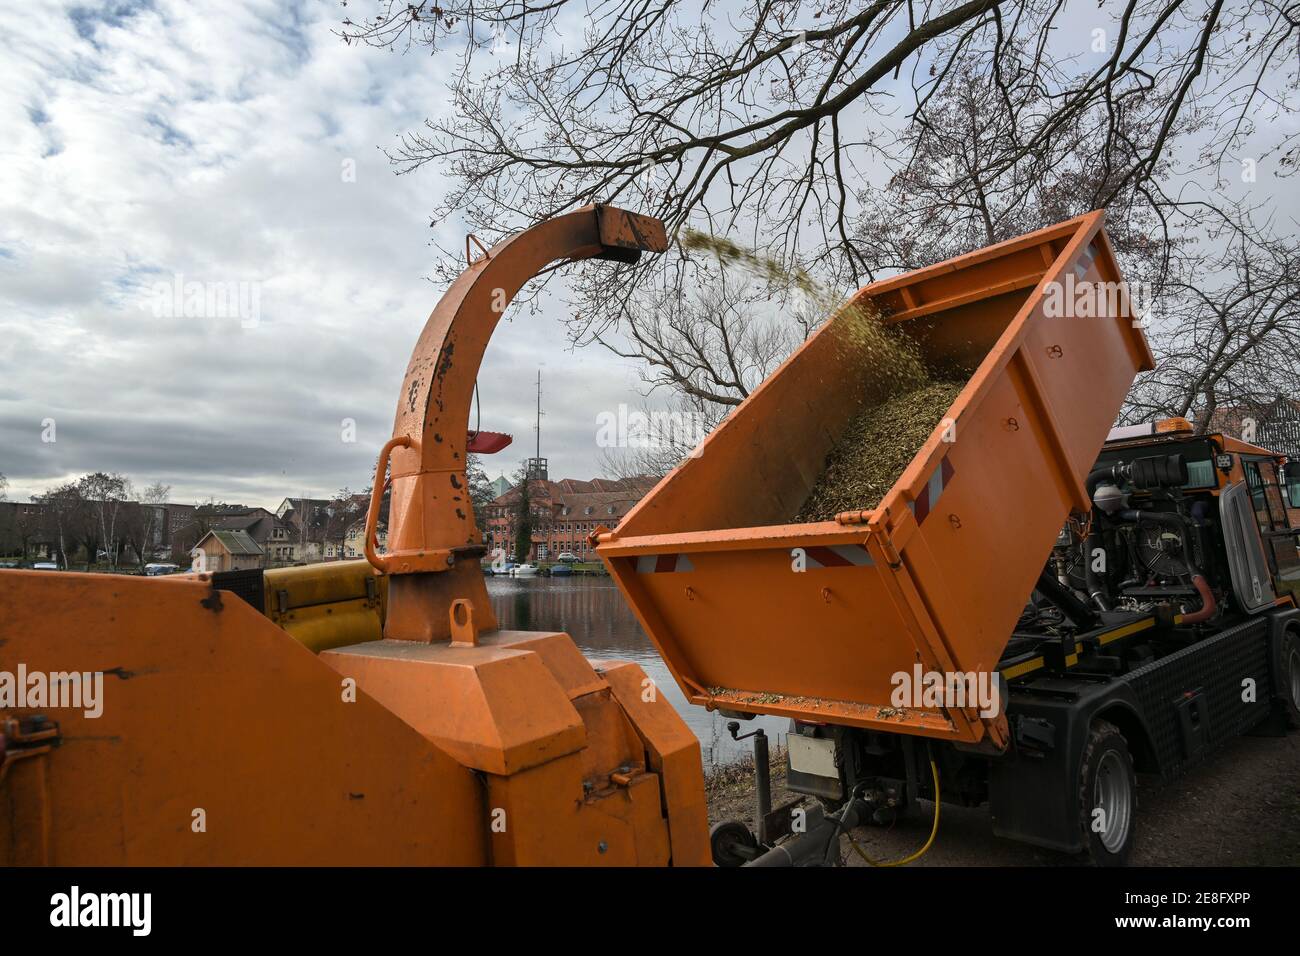 Professional heavy duty shredding machine blows the shredded twigs into a dump truck, during tree and shrub pruning work in the park, selected focus Stock Photo